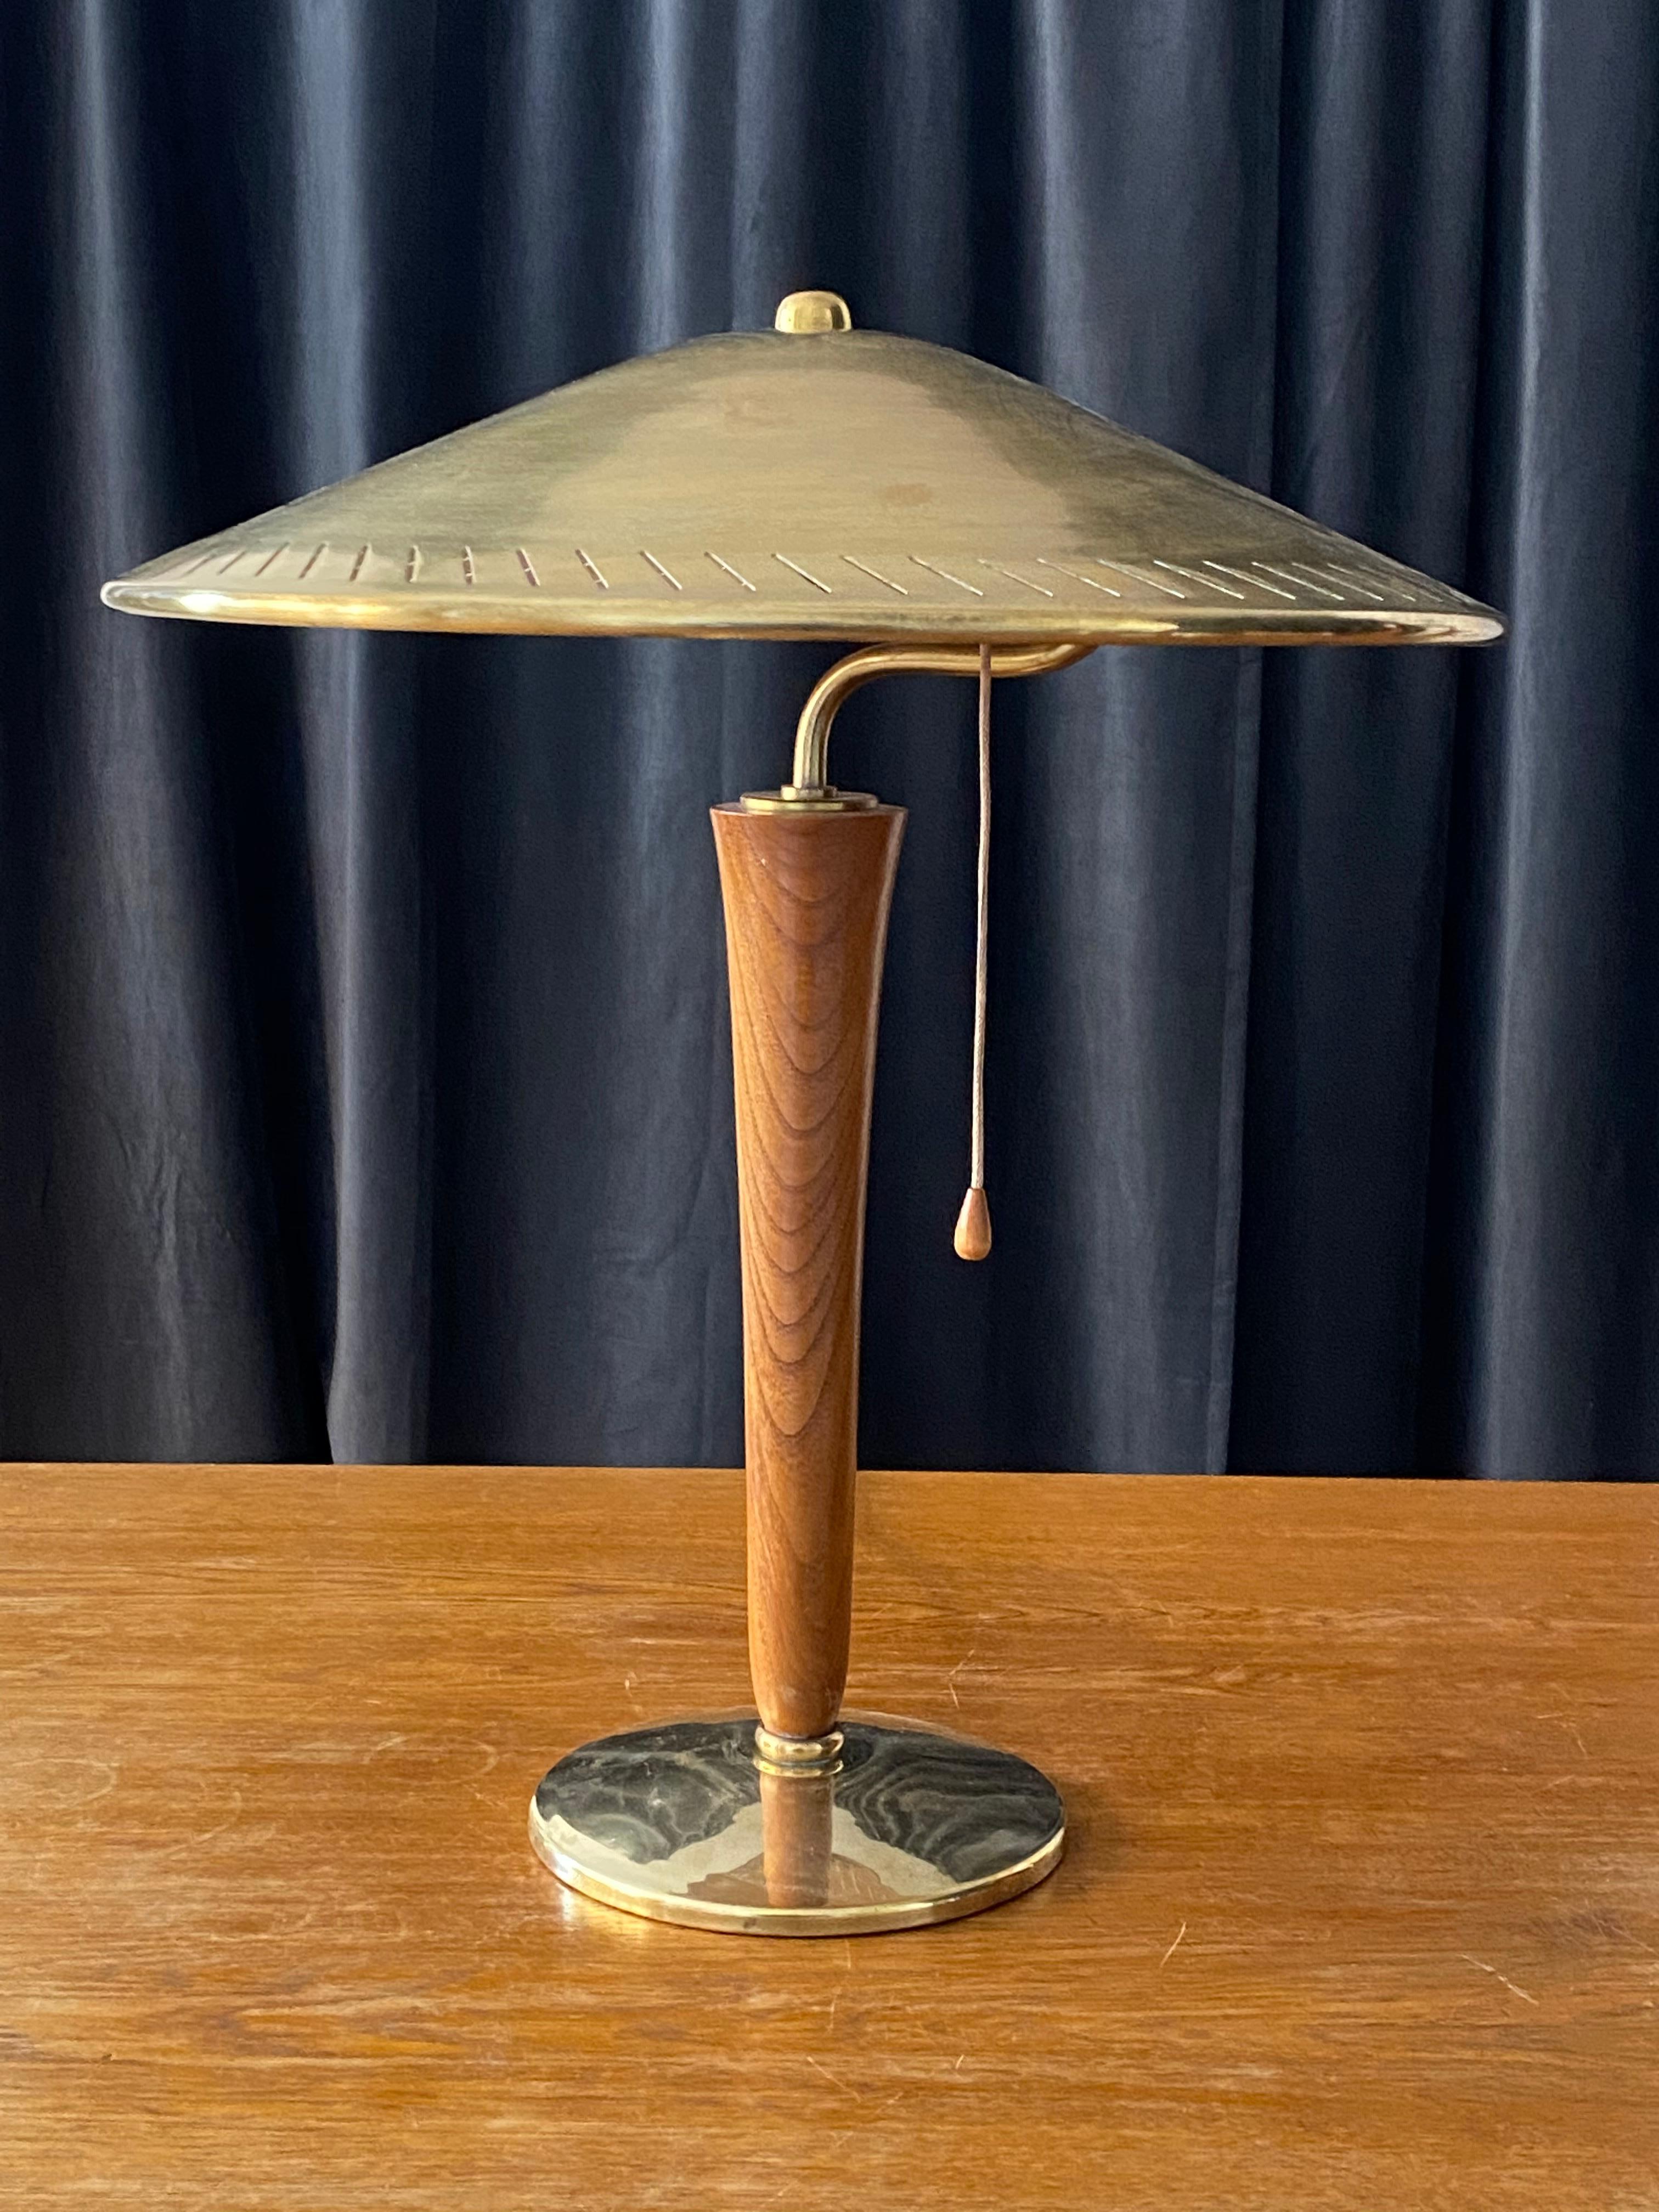 An early modernist table lamp. In brass and wood. Produced in Sweden, 1940s.

Other designers of the period include Paavo Tynell, Lisa Johansson-Pape, Carl-Axel Acking, and Gunnar Asplund.